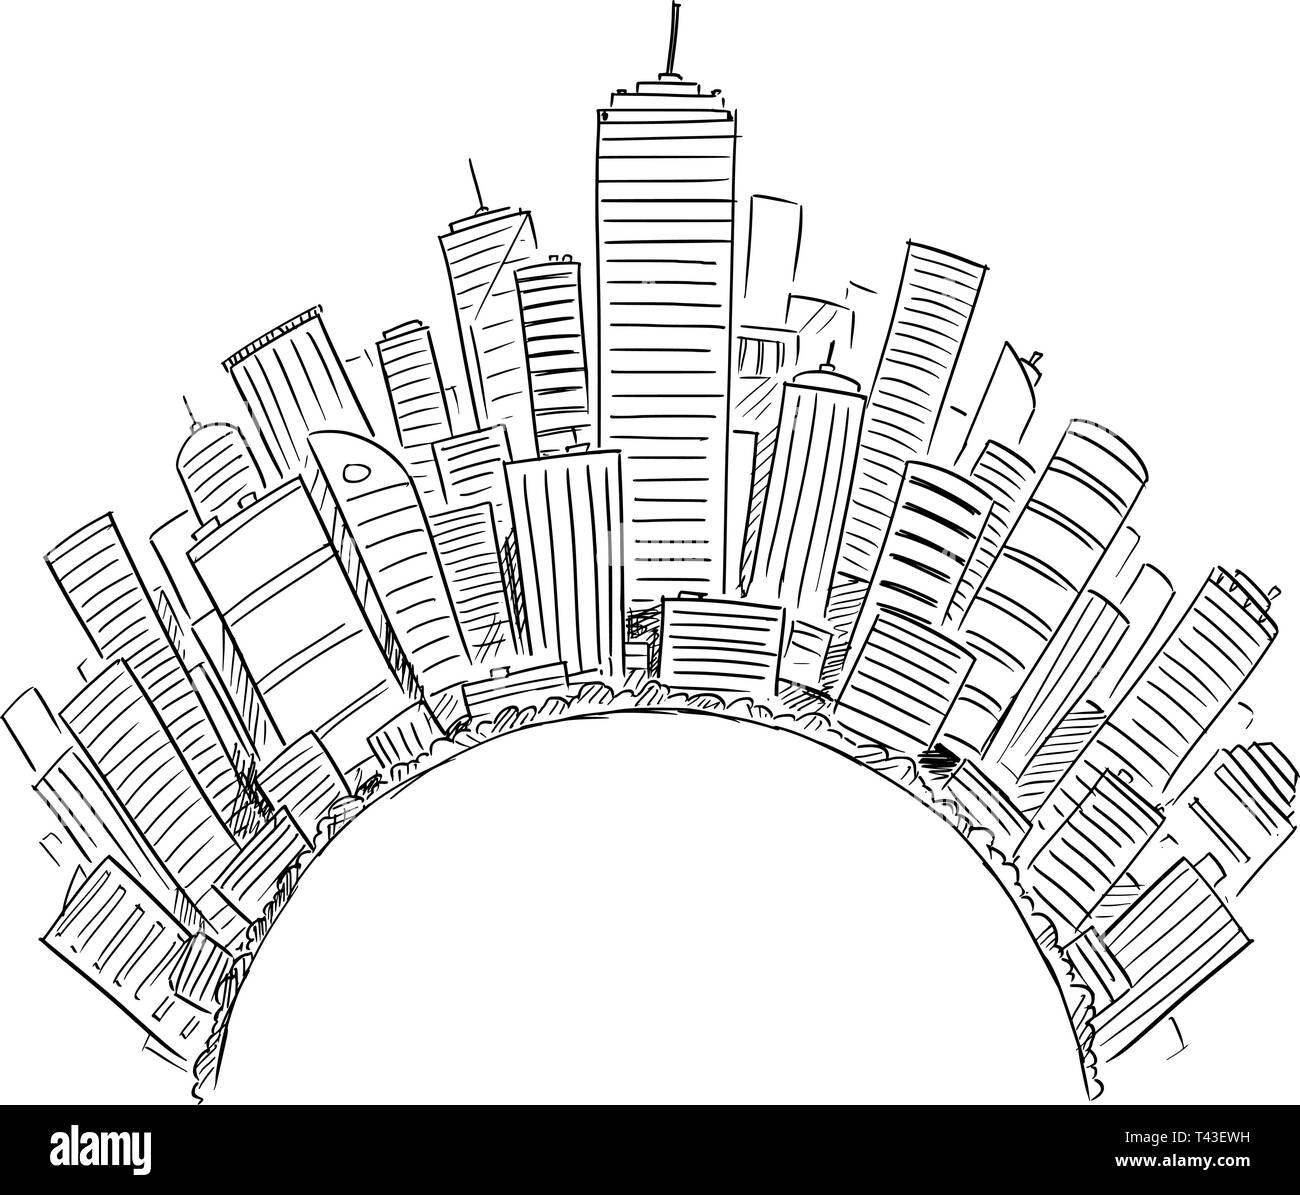 Vector drawing of high rise modern buildings covering half globe or circle as representation of global civilization or business. Concept of financial sector and global economics. Stock Vector